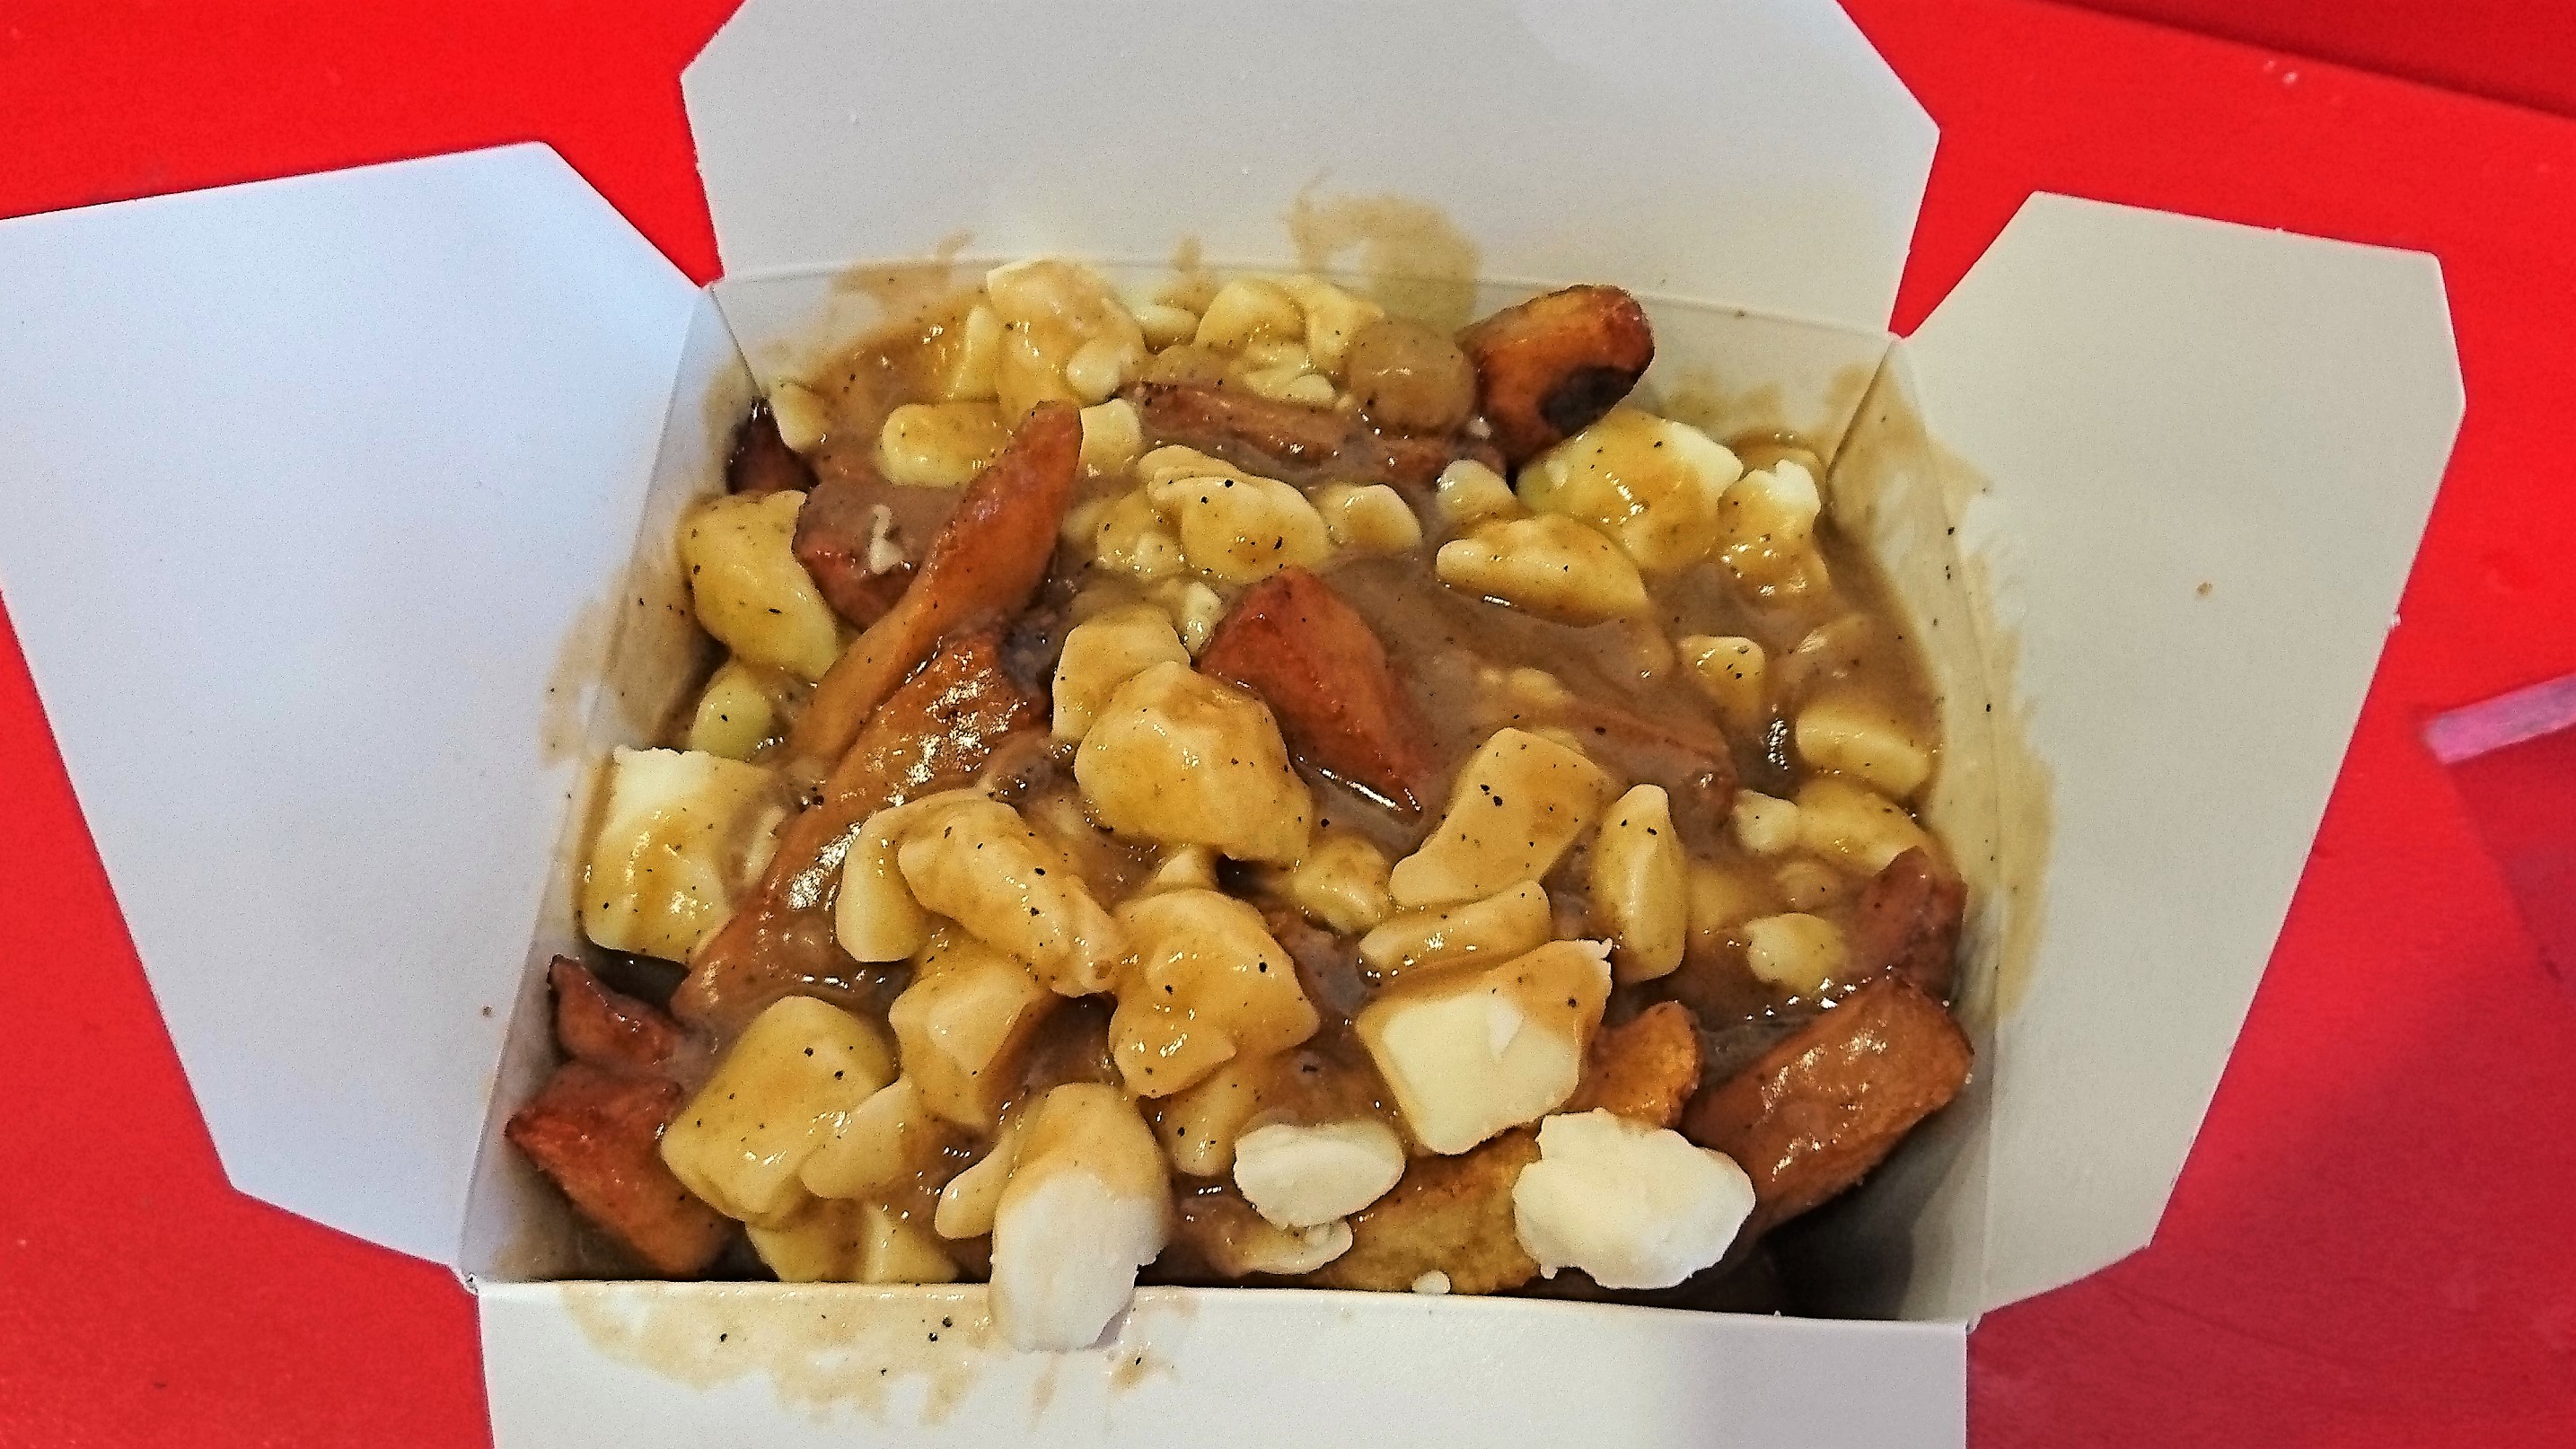 Trying poutine